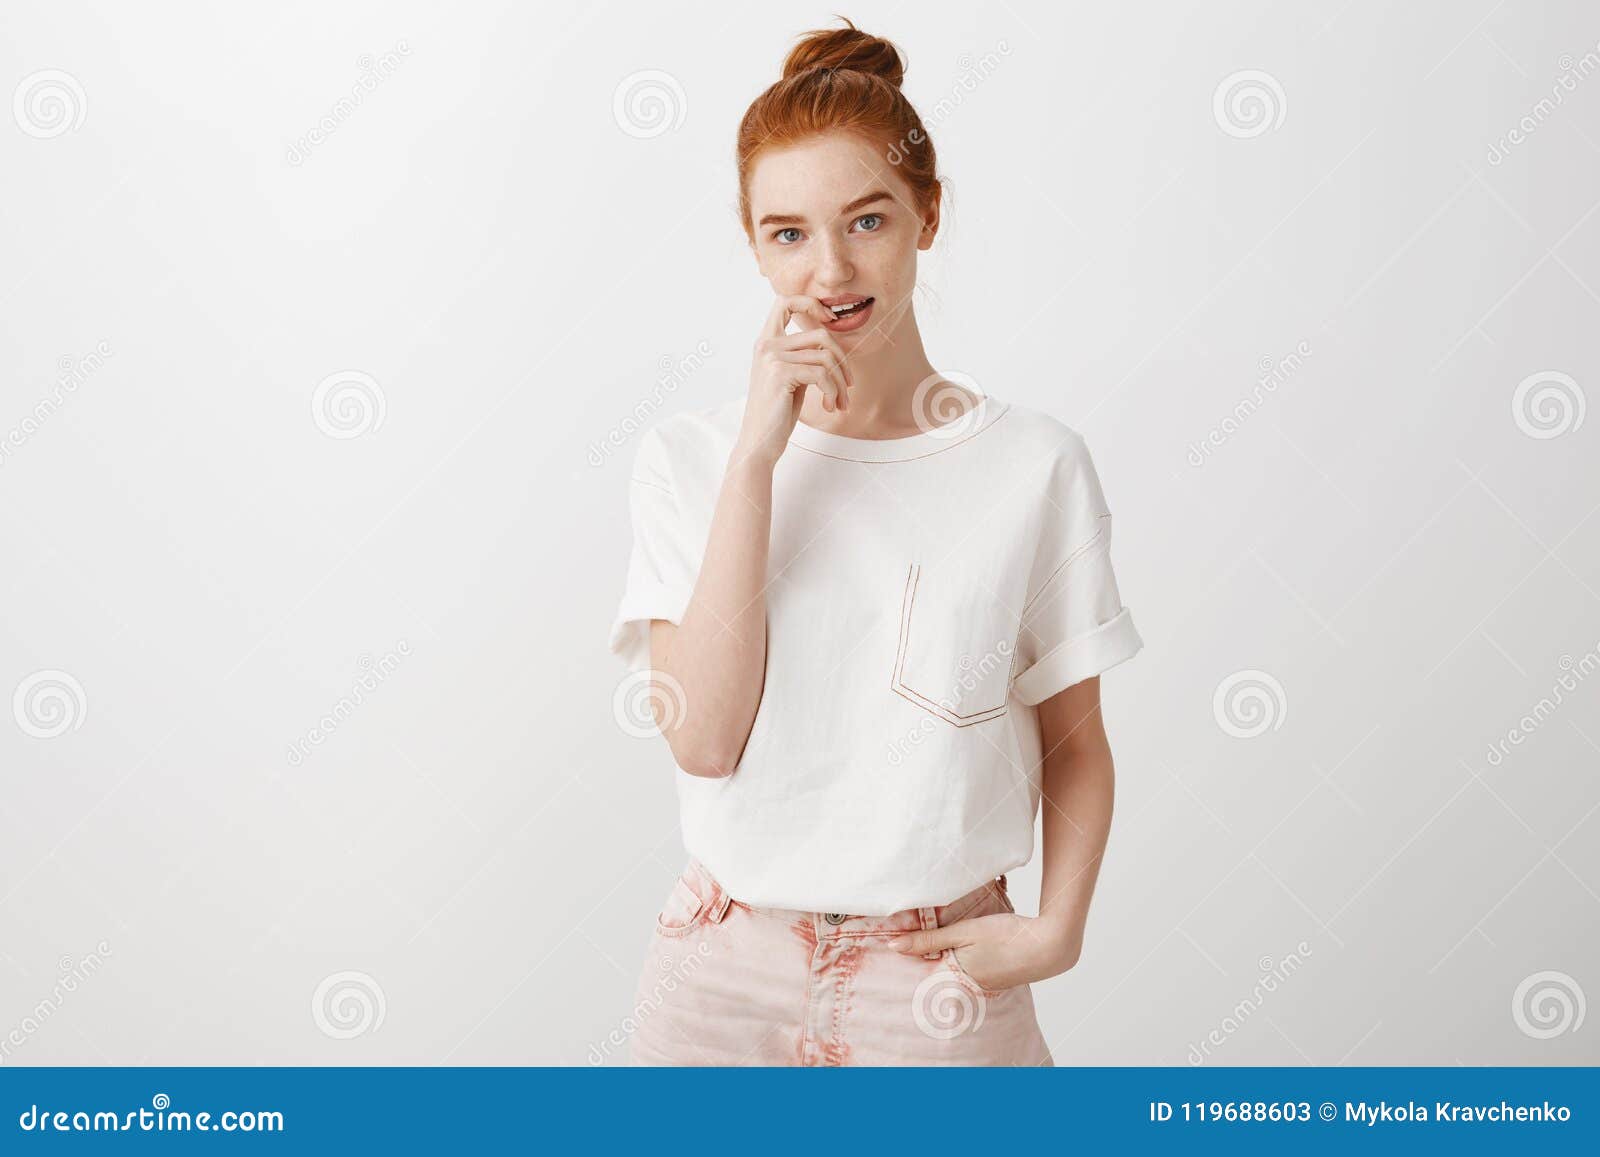 Good-looking Stylish Redhead Female Student with Bun Hairstyle in Trendy  T-shirt and Jeans, Holding Finger on Lip and Stock Image - Image of  fashionable, cute: 119688603